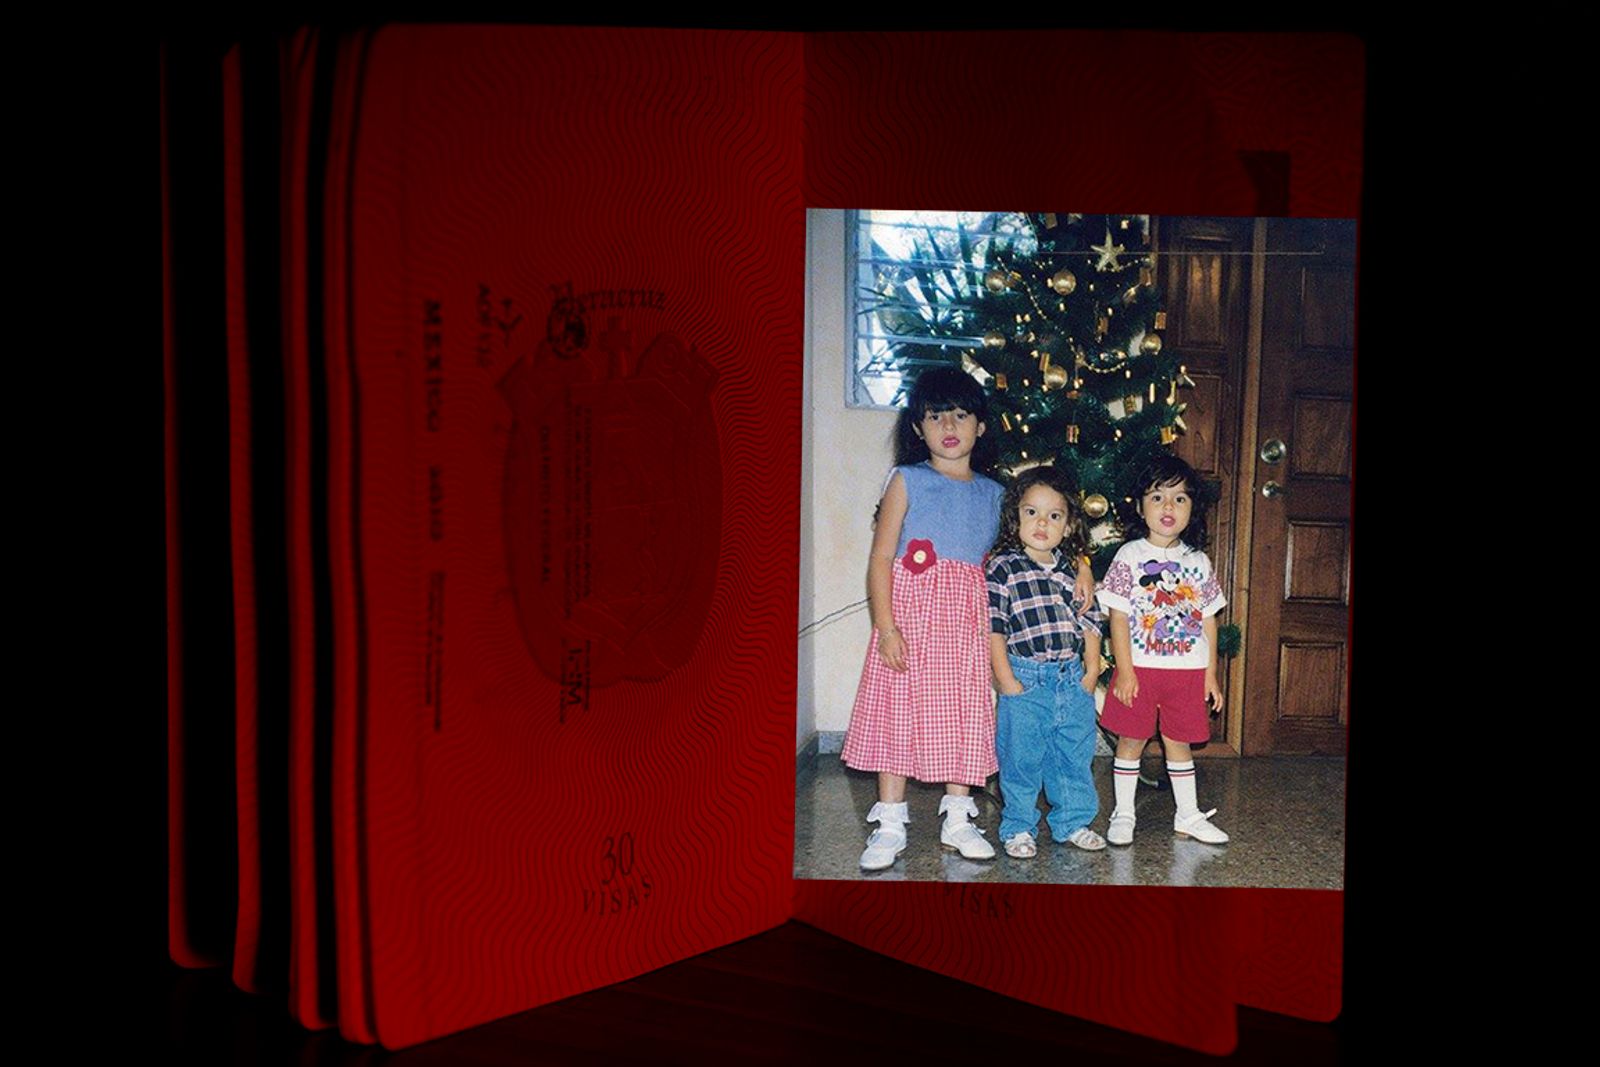 © Andrea Selene Morales Ugalde - Intervention of a photo from my passport with a file photograph of my brothers and I at Christmas.